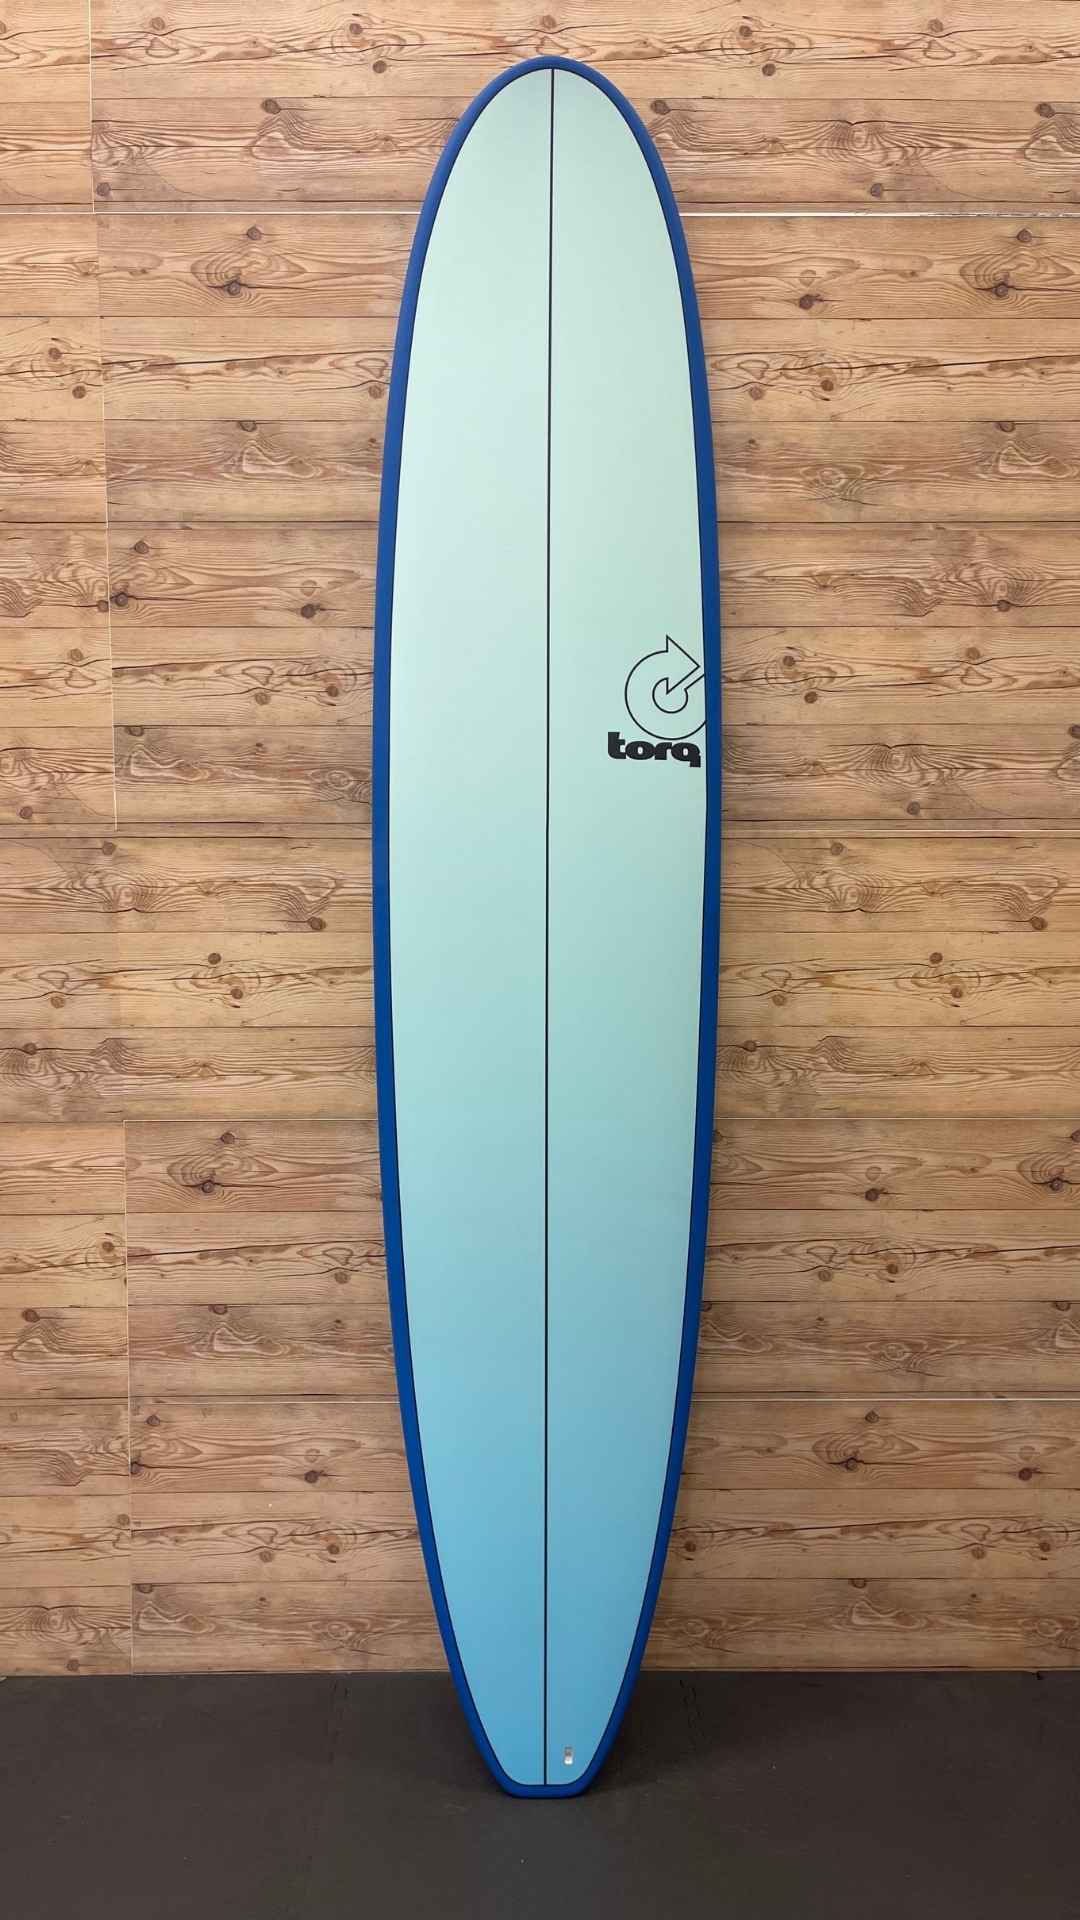 New & Used Longboard Surfboards for Sale – The Board Source